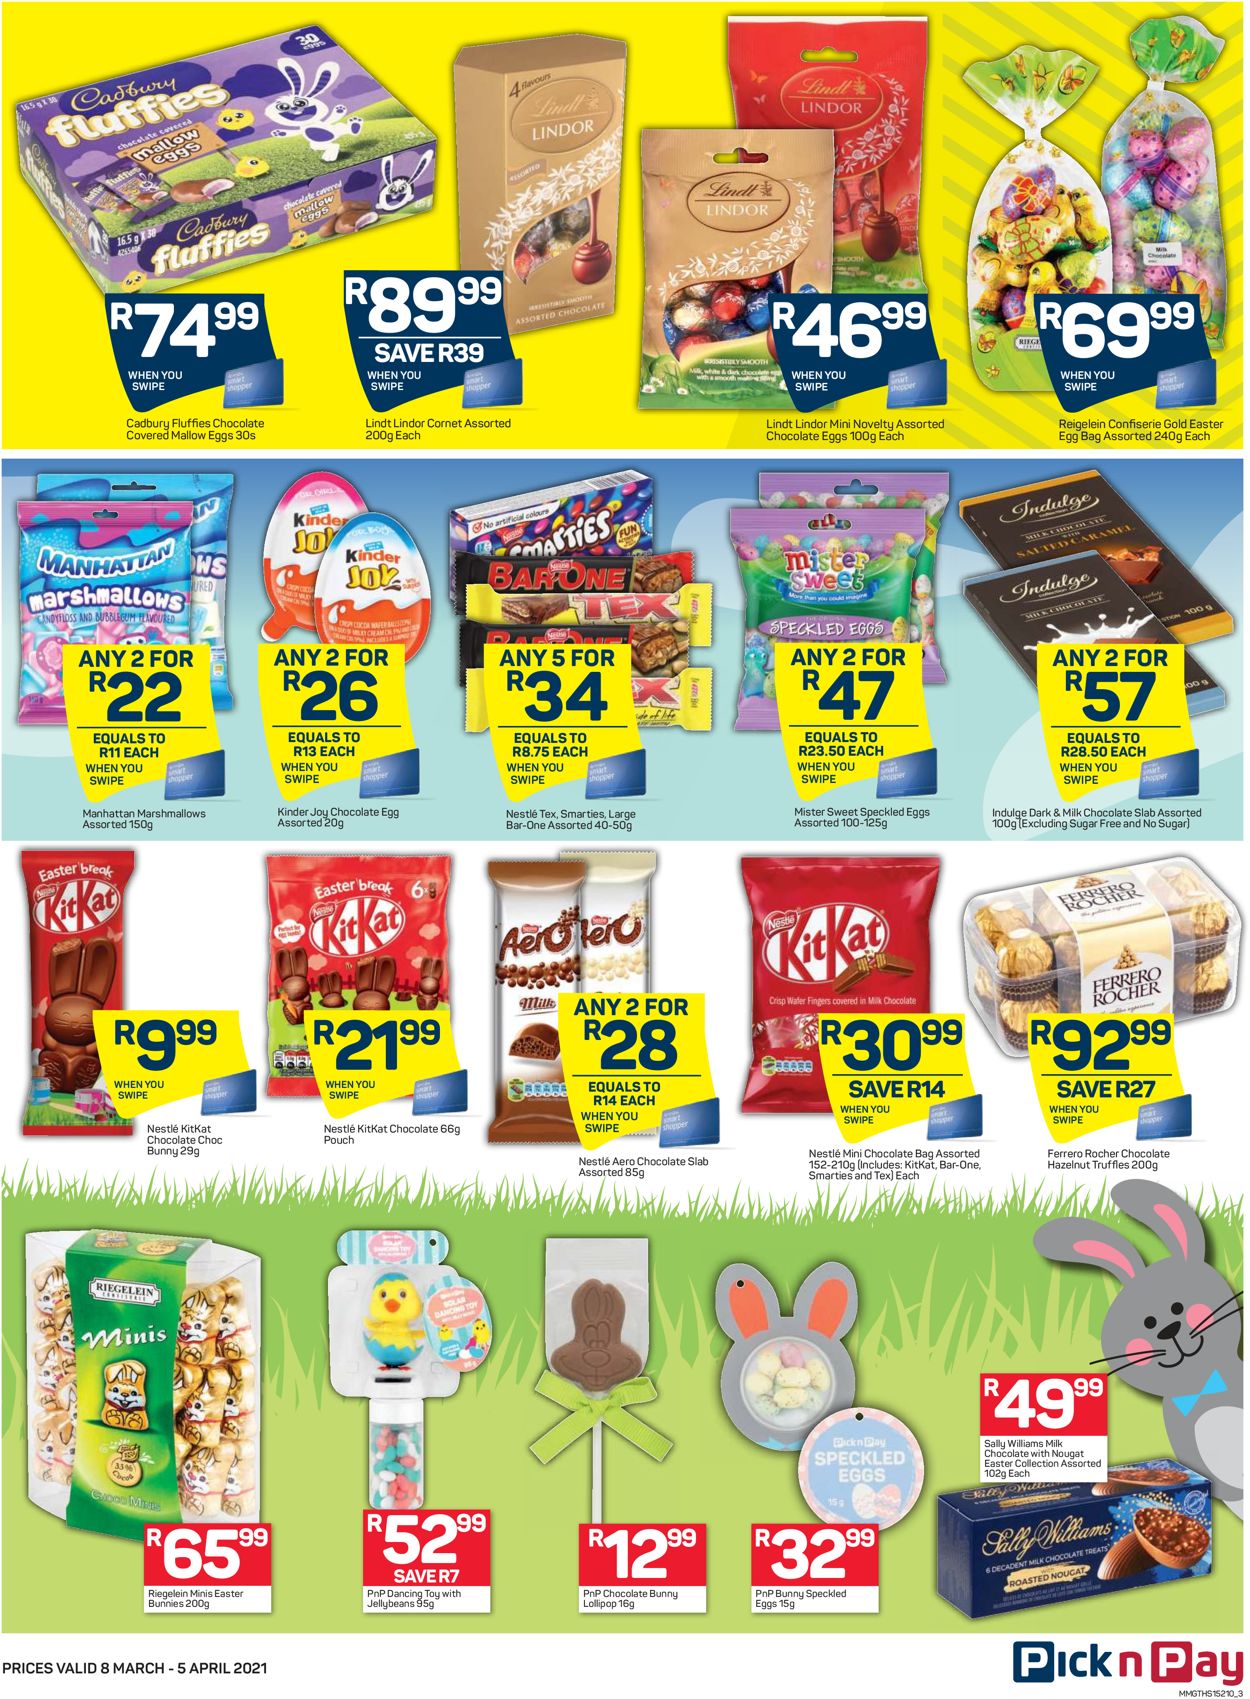 Pick n Pay Current catalogue 2021/03/08 - 2021/04/05 [3]